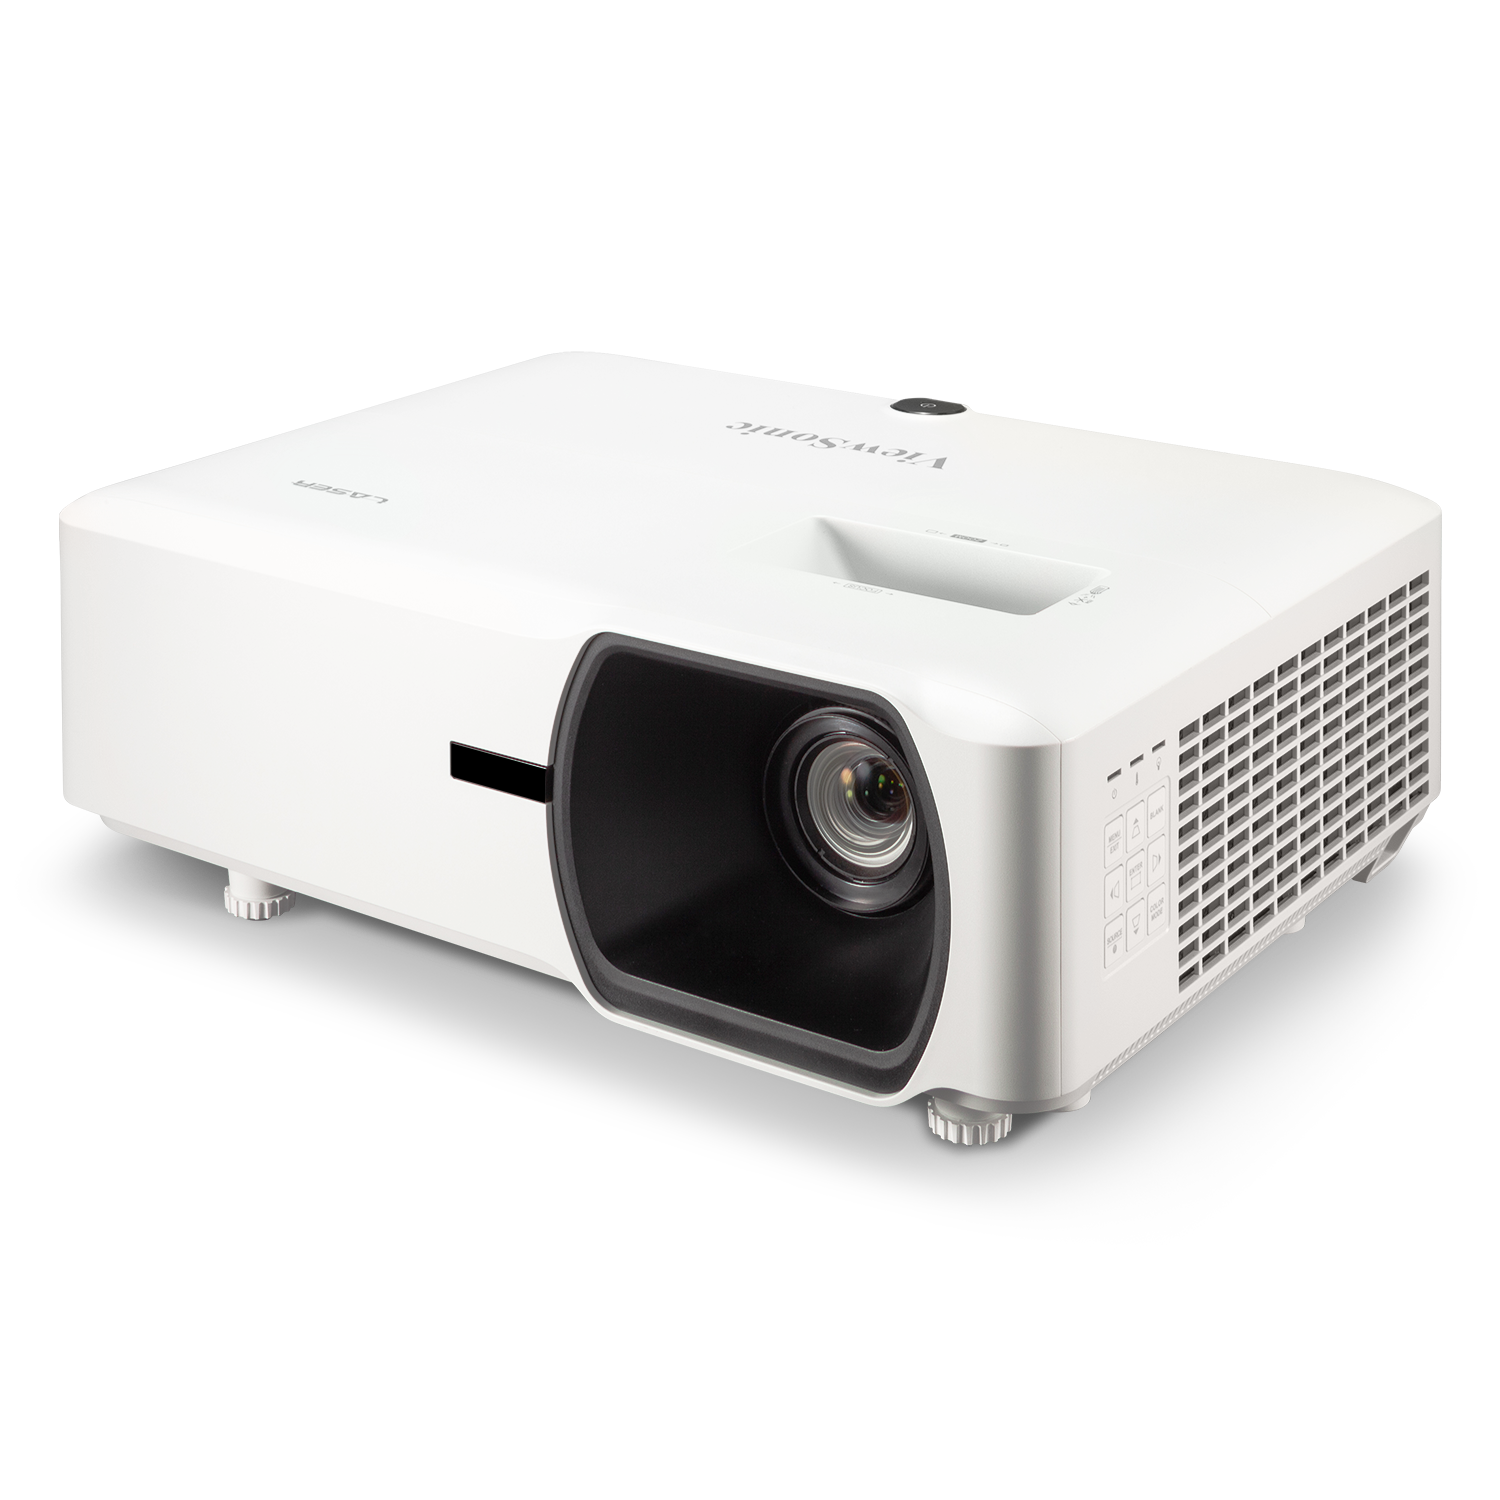 ViewSonic LS750WU 5000 Lumens WUXGA Networkable Laser Projector with 1.3x Optical Zoom Vertical Horizontal Keystone and Lens Shift for Large Venues - image 5 of 6